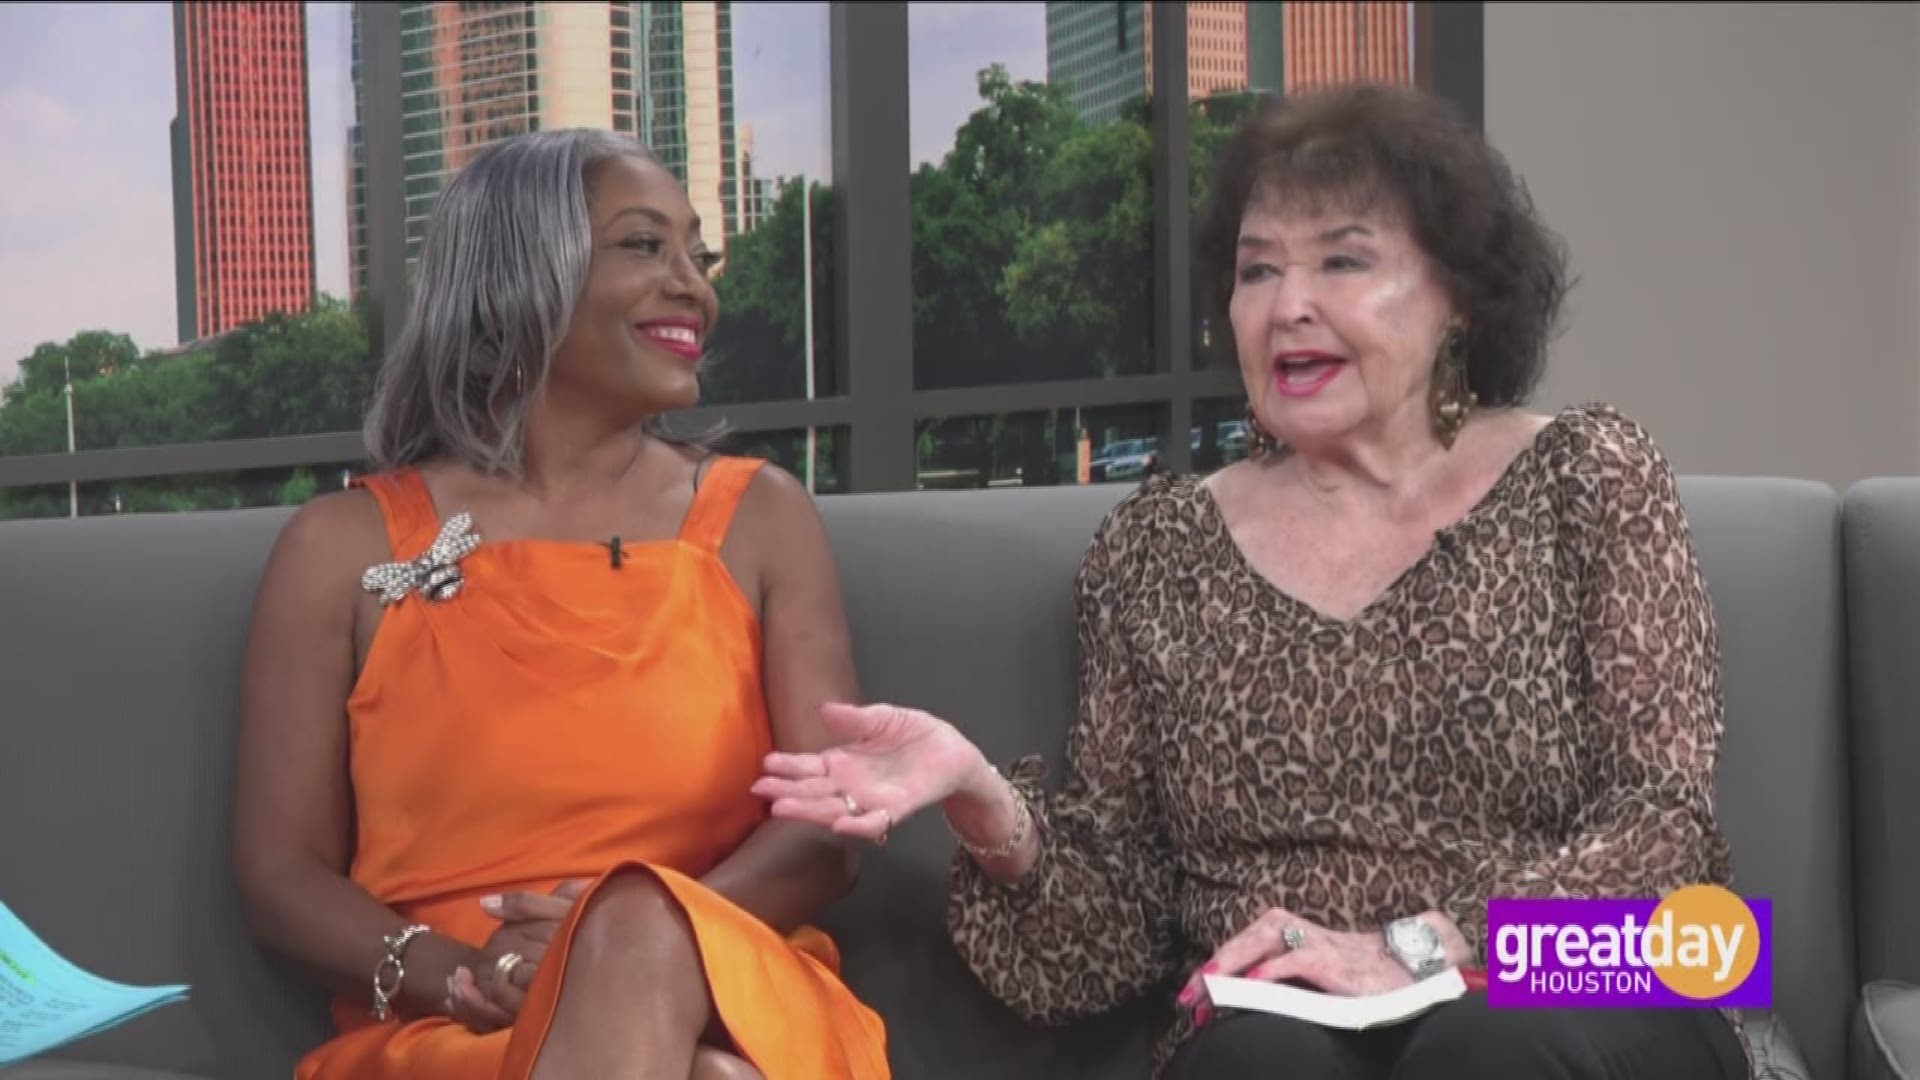 Warner Roberts and Monitrice Malone speak about aging gracefully.